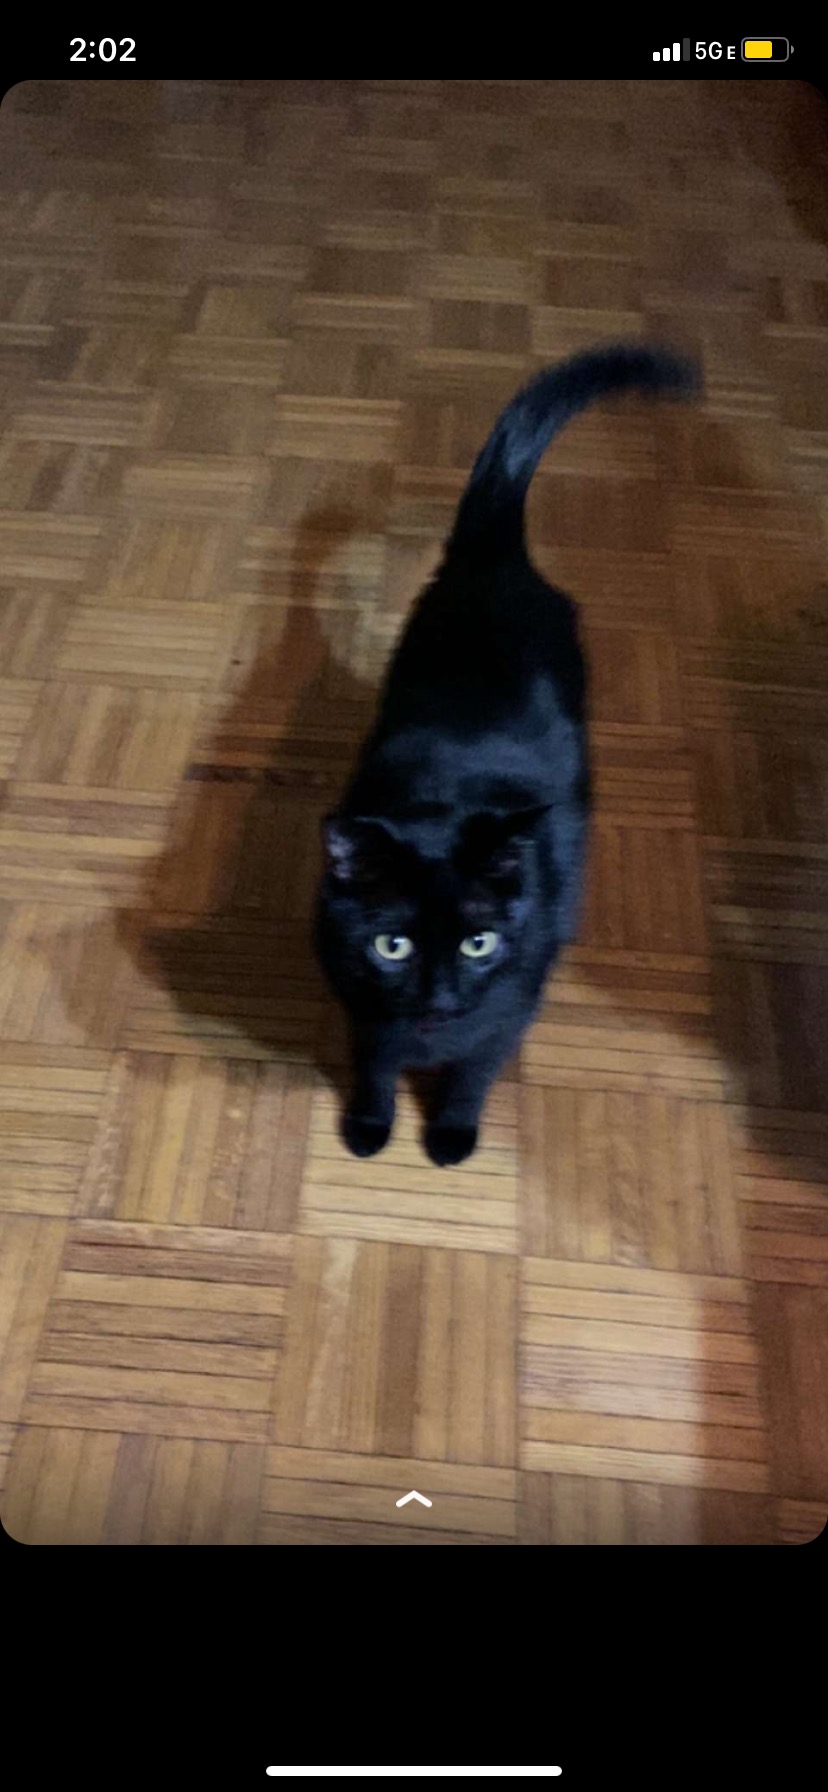 Image of Toothless, Lost Cat